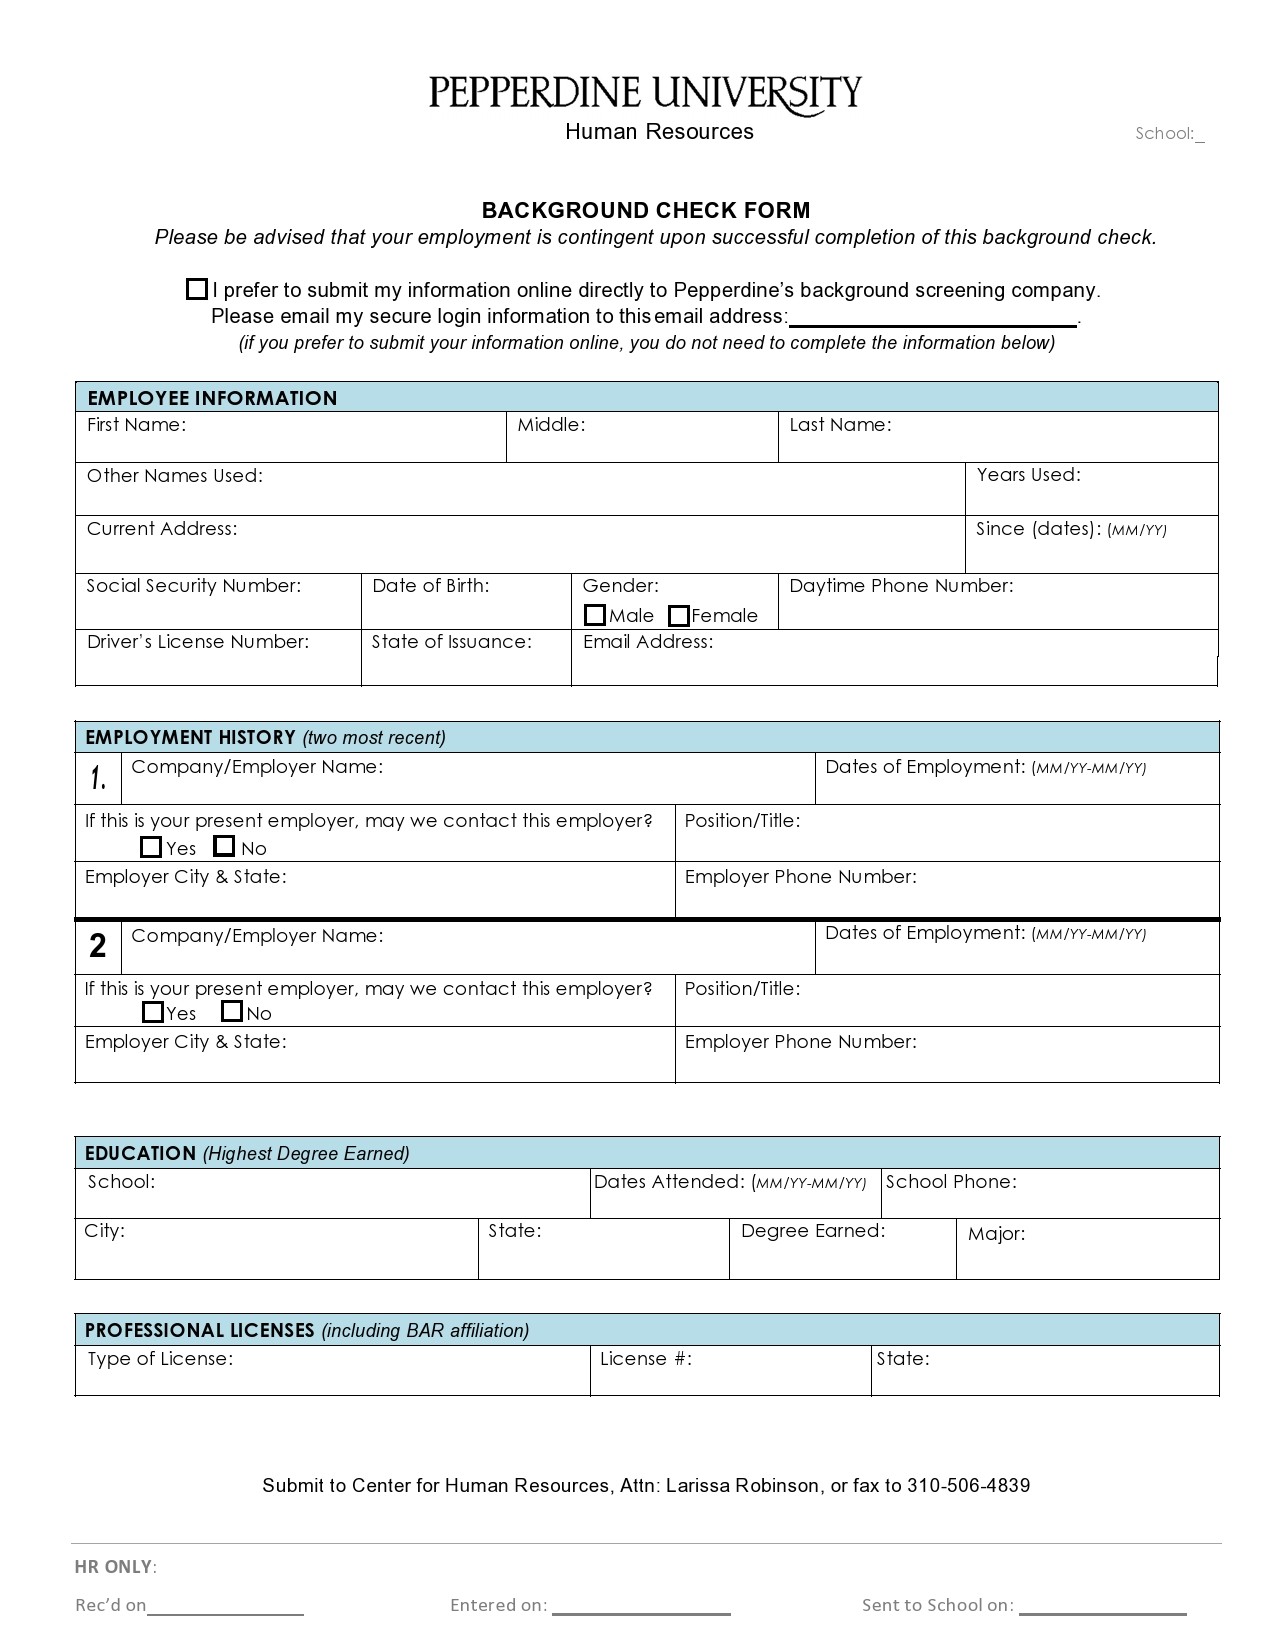 47 Free Background Check Authorization Forms ᐅ TemplateLab